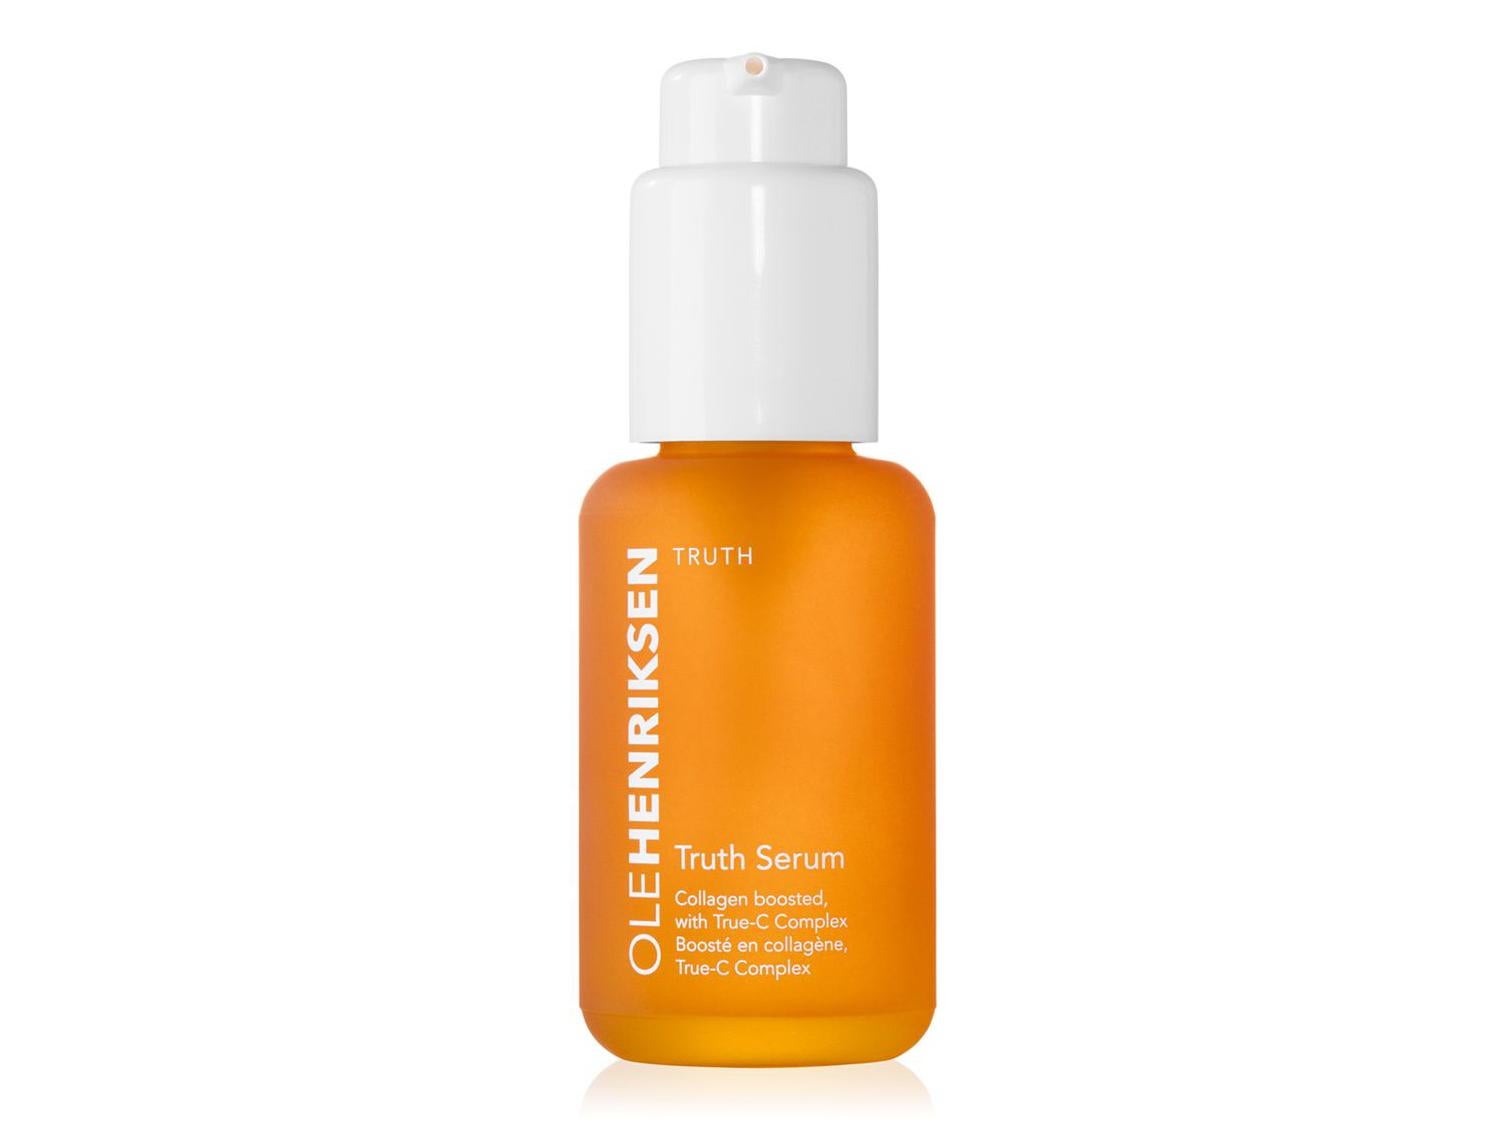 This fast-acting vitamin C serum, to be applied after cleansing and before moisturising, reduced redness and brightened skin when we tried it (Boots)